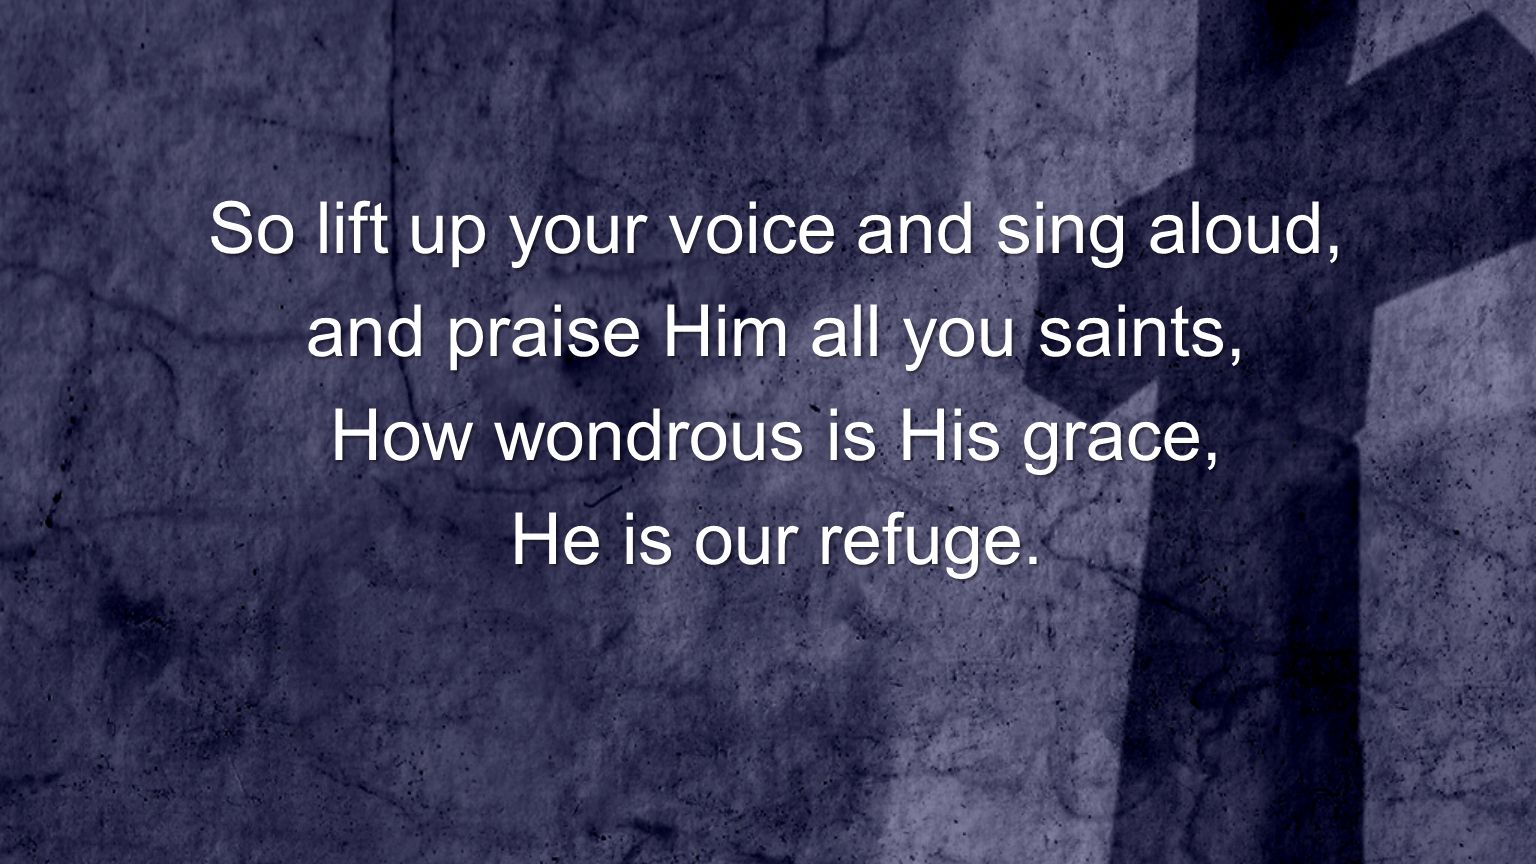 So lift up your voice and sing aloud, and praise Him all you saints,